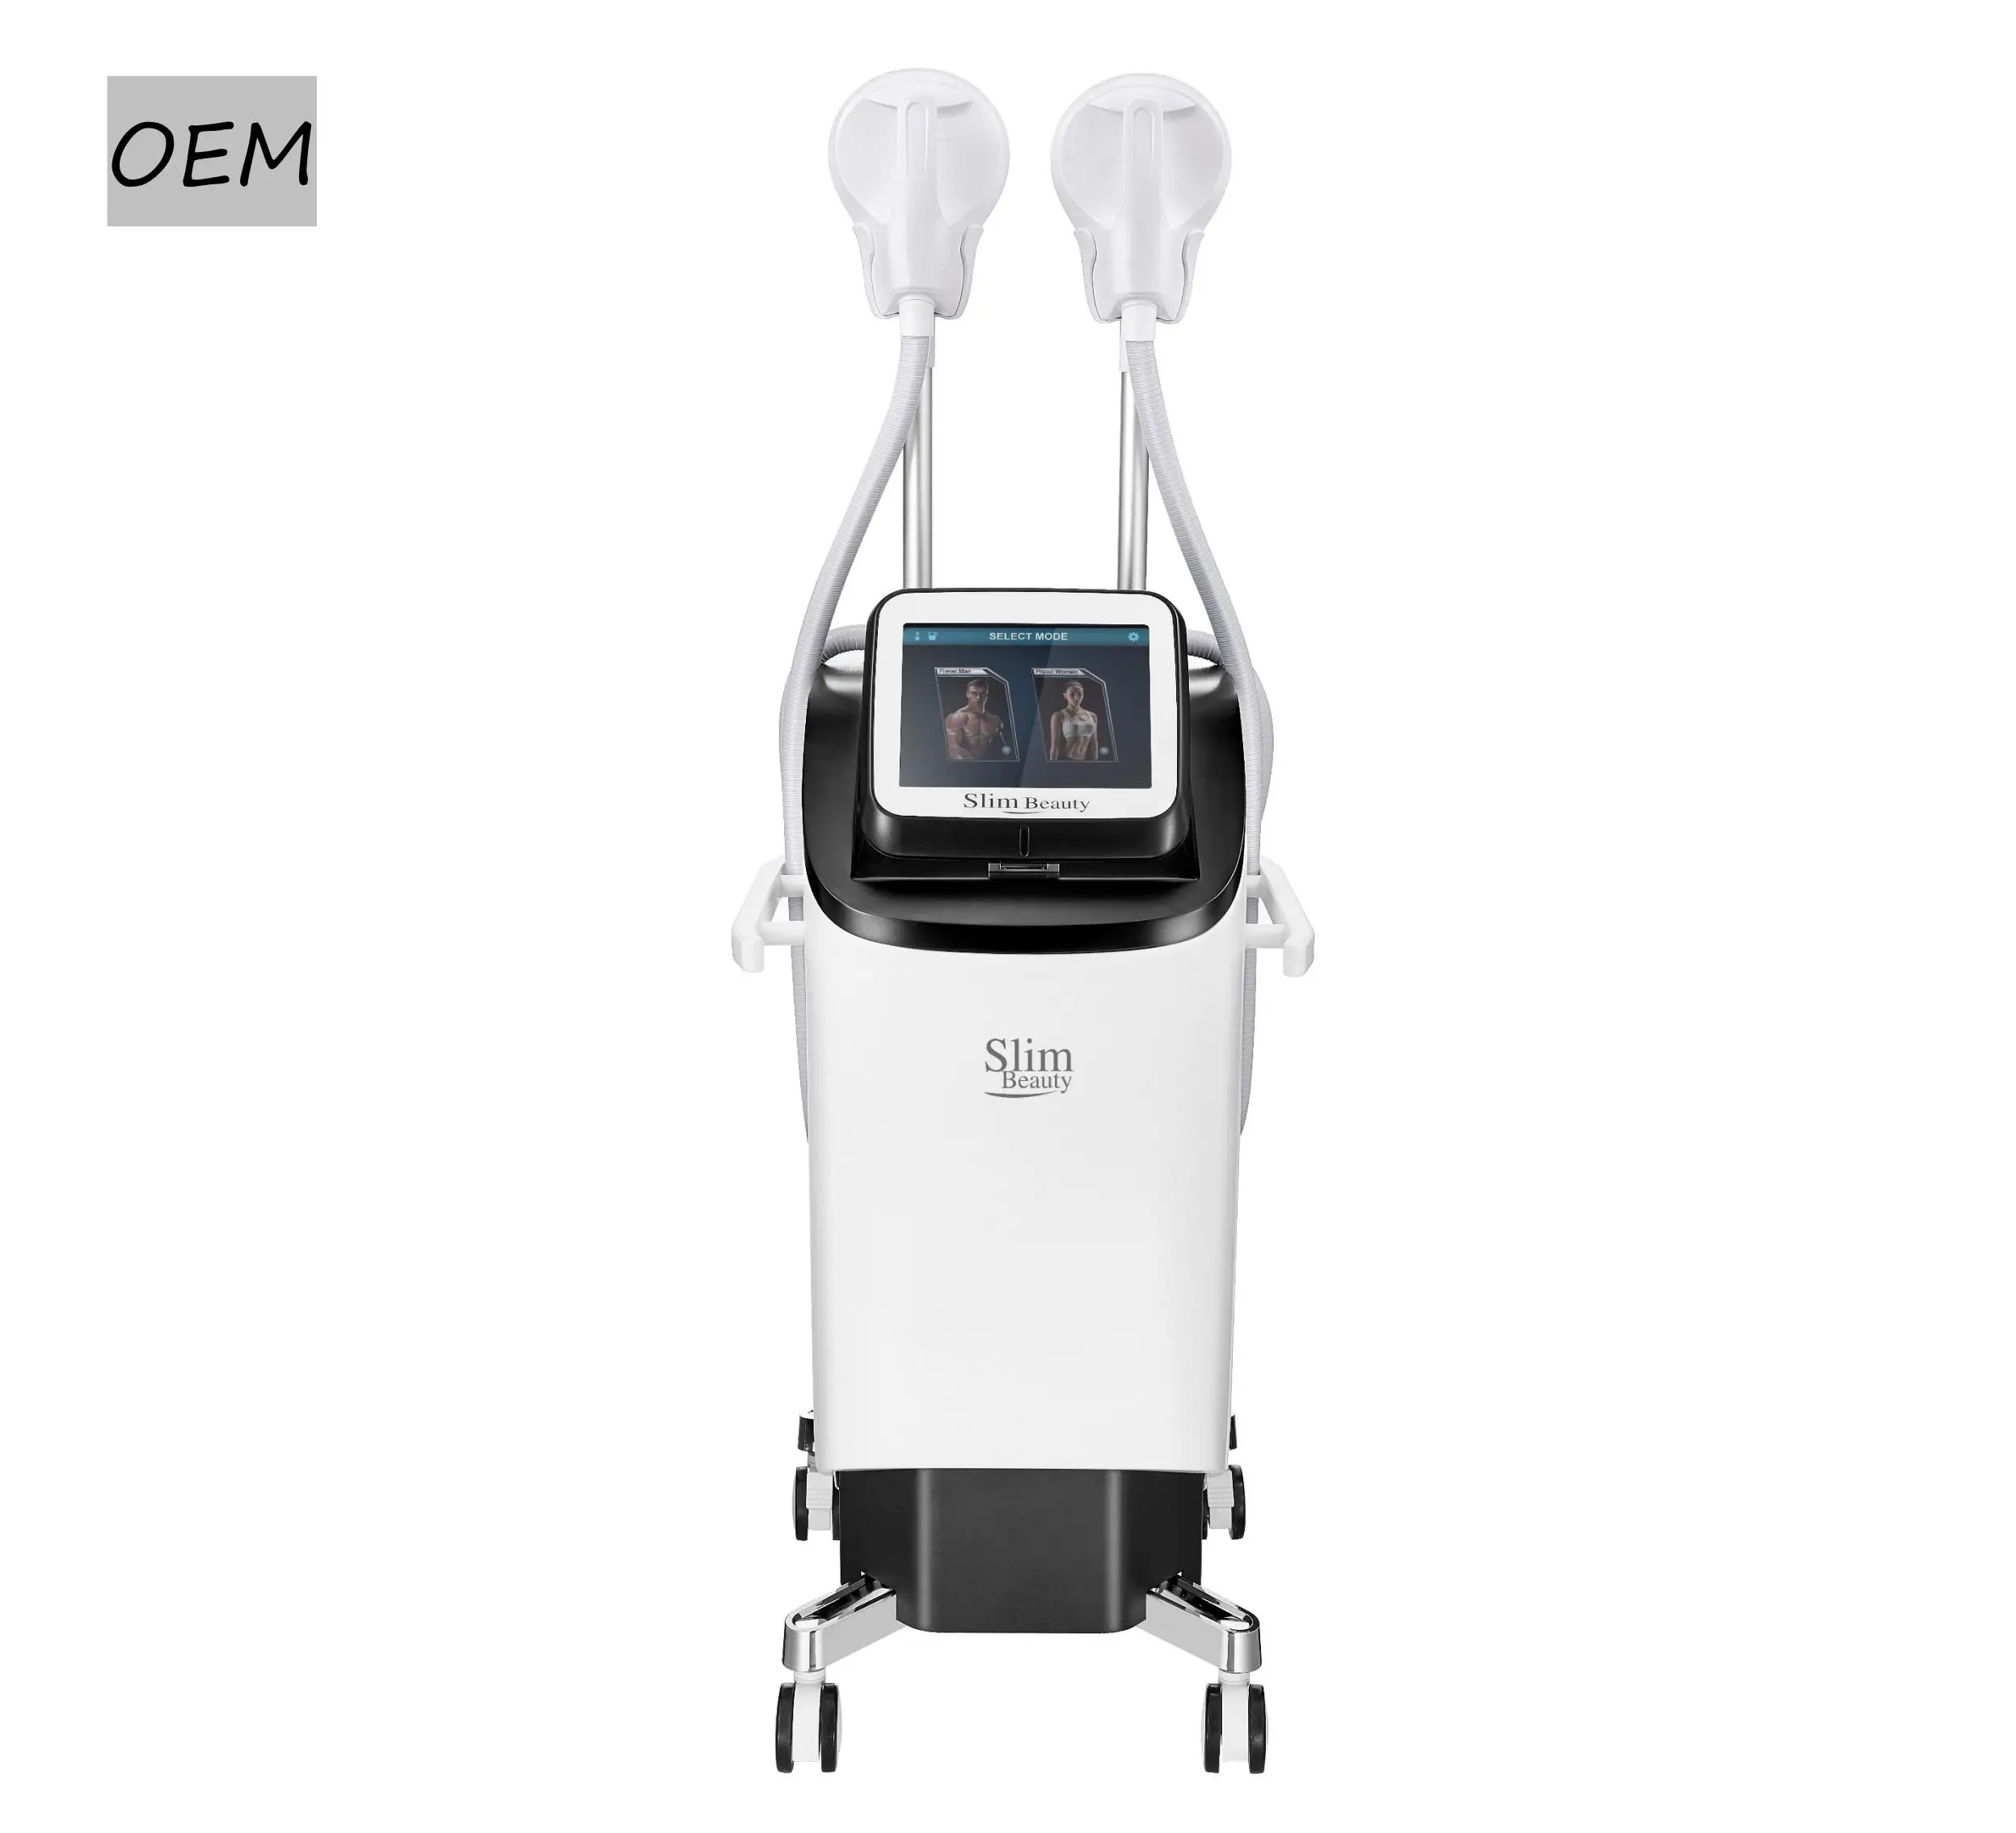 

Hot sale system HI EMT body muscle stimulation machine fat burning body slimming machine for beauty equipment